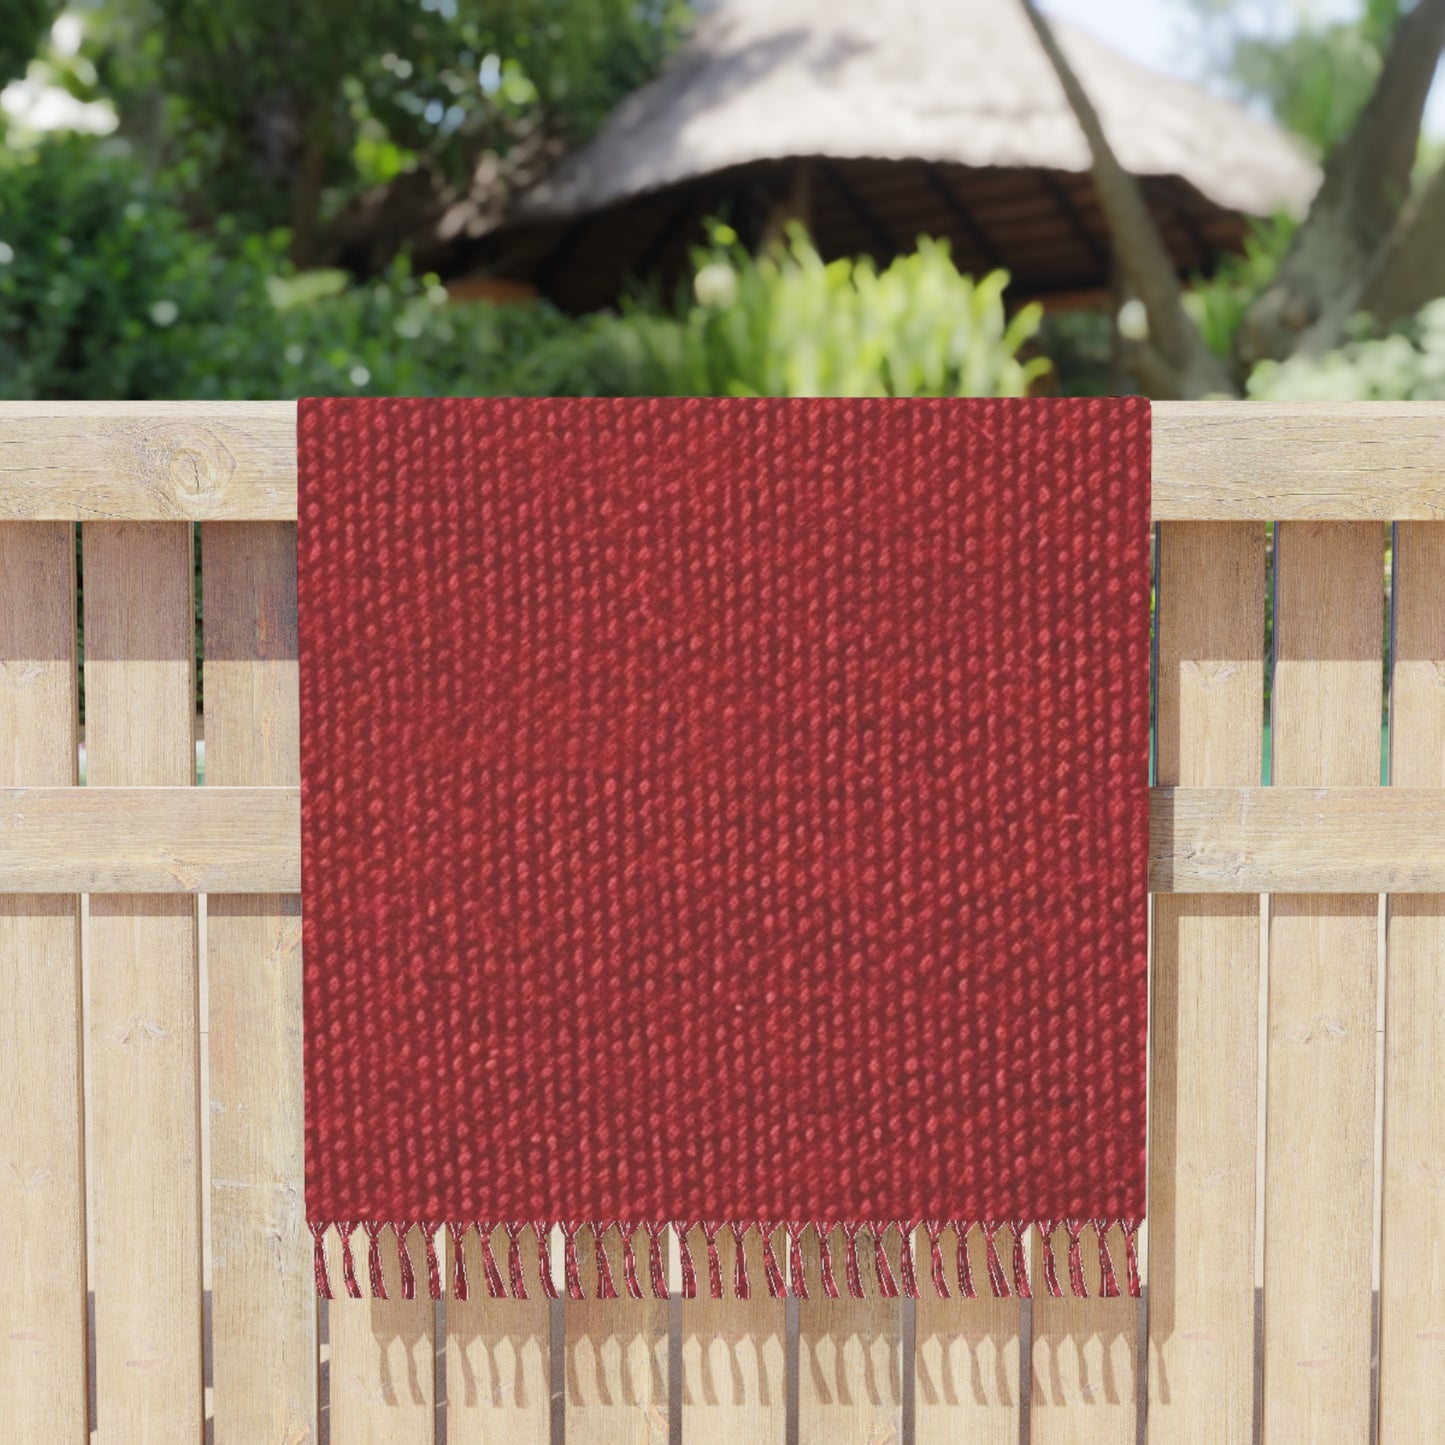 Bold Ruby Red: Denim-Inspired, Passionate Fabric Style - Boho Beach Cloth